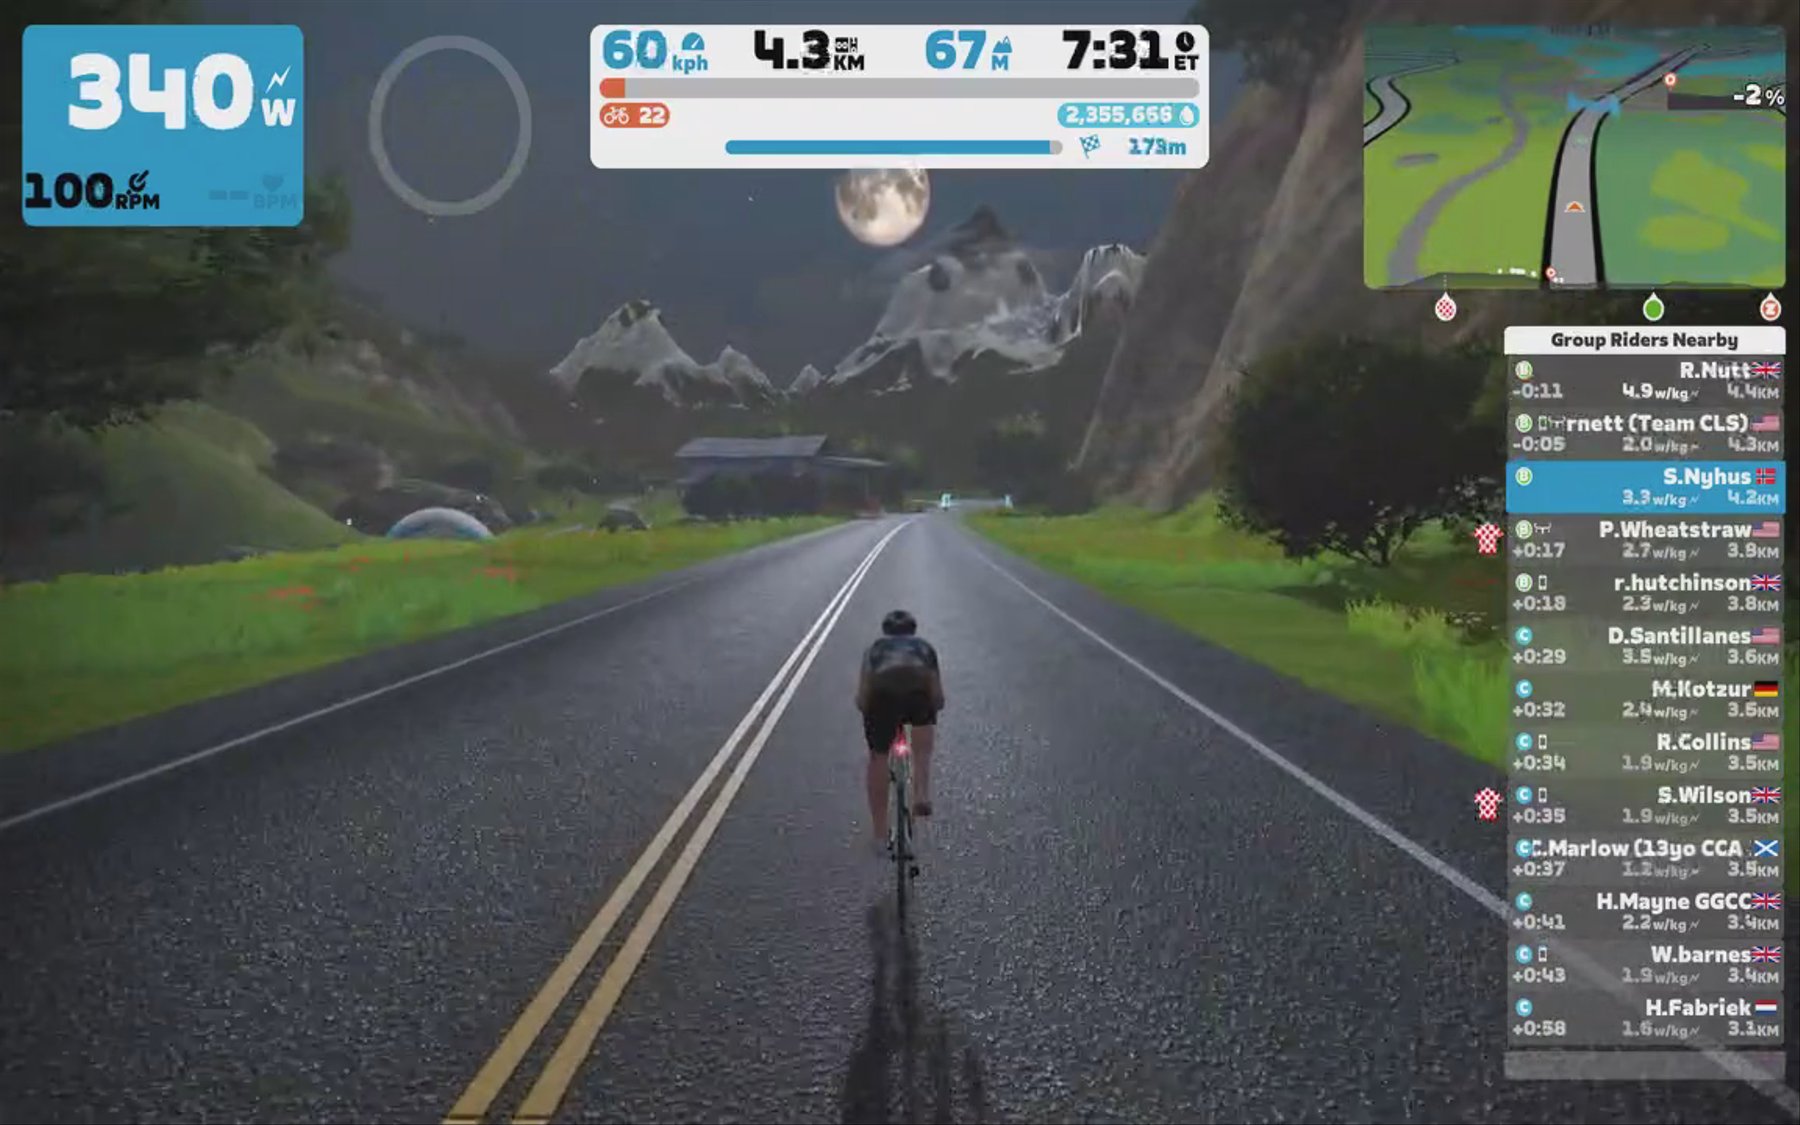 Zwift - Race: Zwift Hill Climb Racing Club - Hilly KQOM Forwards (B) on Hilly Route in Watopia